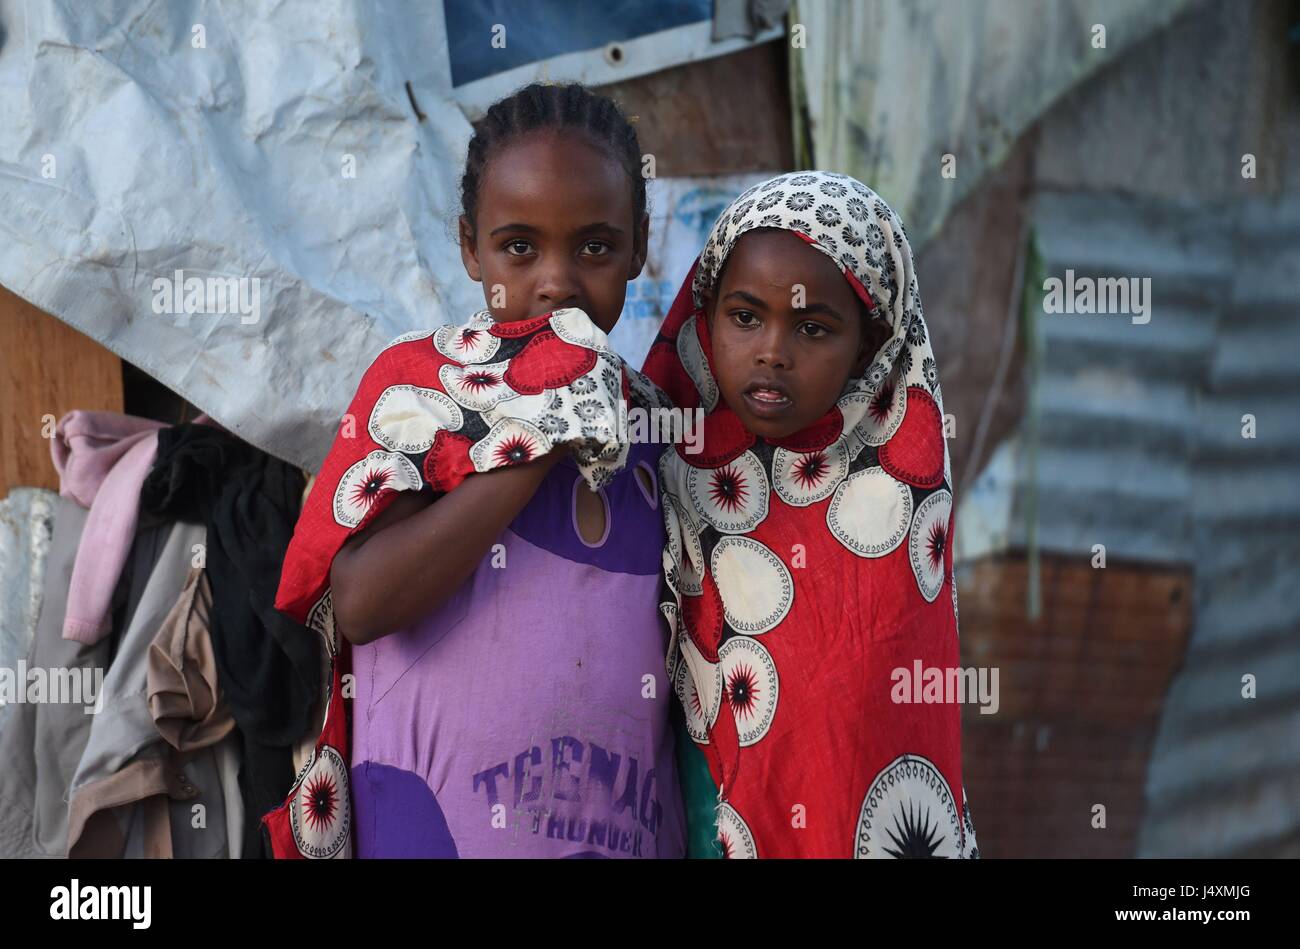 Children in an internally displaced person (IDP) camp in Hargeisa, Somaliland where families have had to leave their homes in villages move to the city in order to find food and water after recent drought. Stock Photo